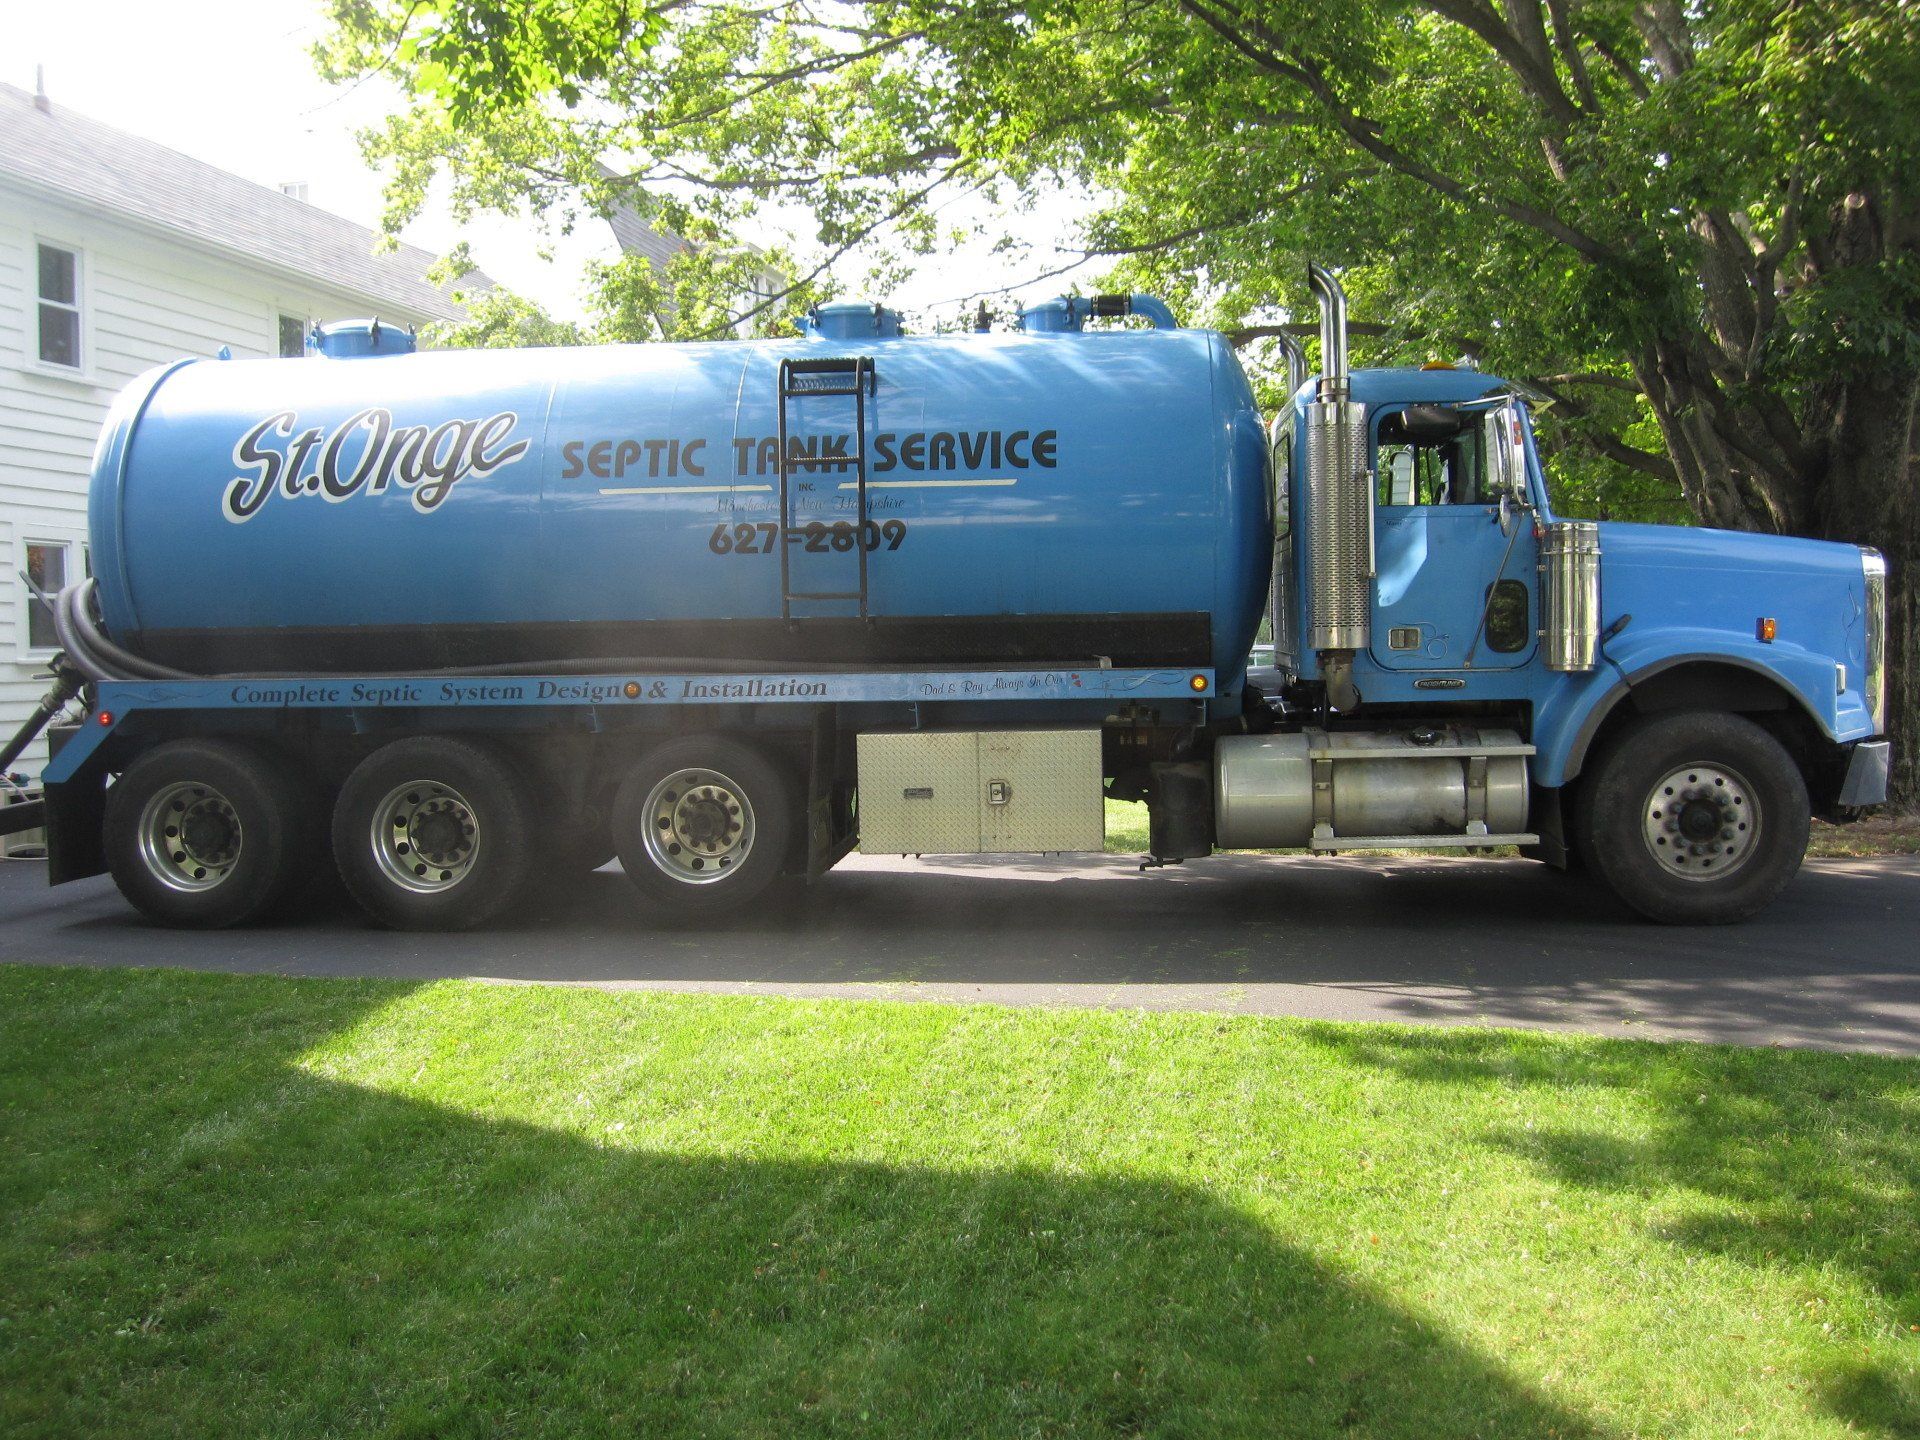 Emptying Septic — Septic Tank Service in Manchester, NH